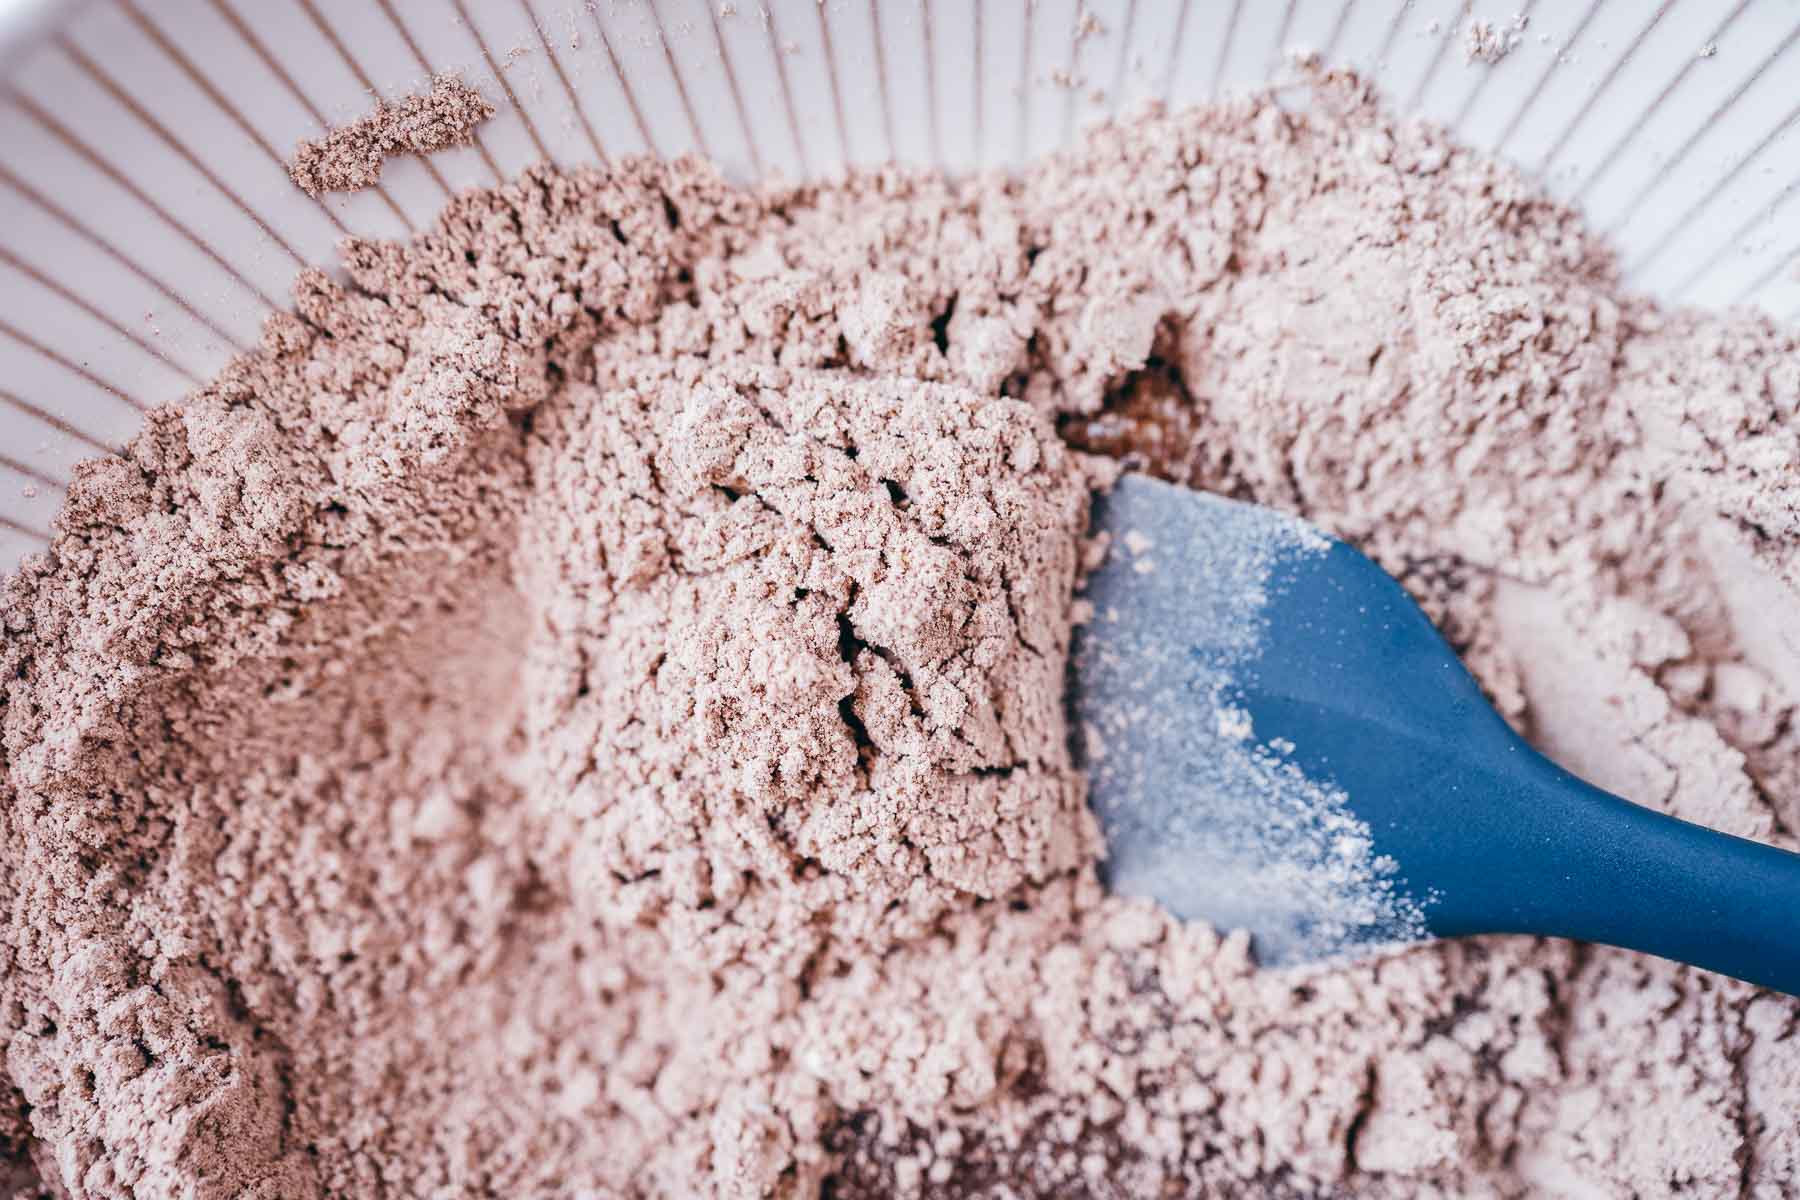 A ceramic bowl with dry cookie ingredients and a blue spatula.